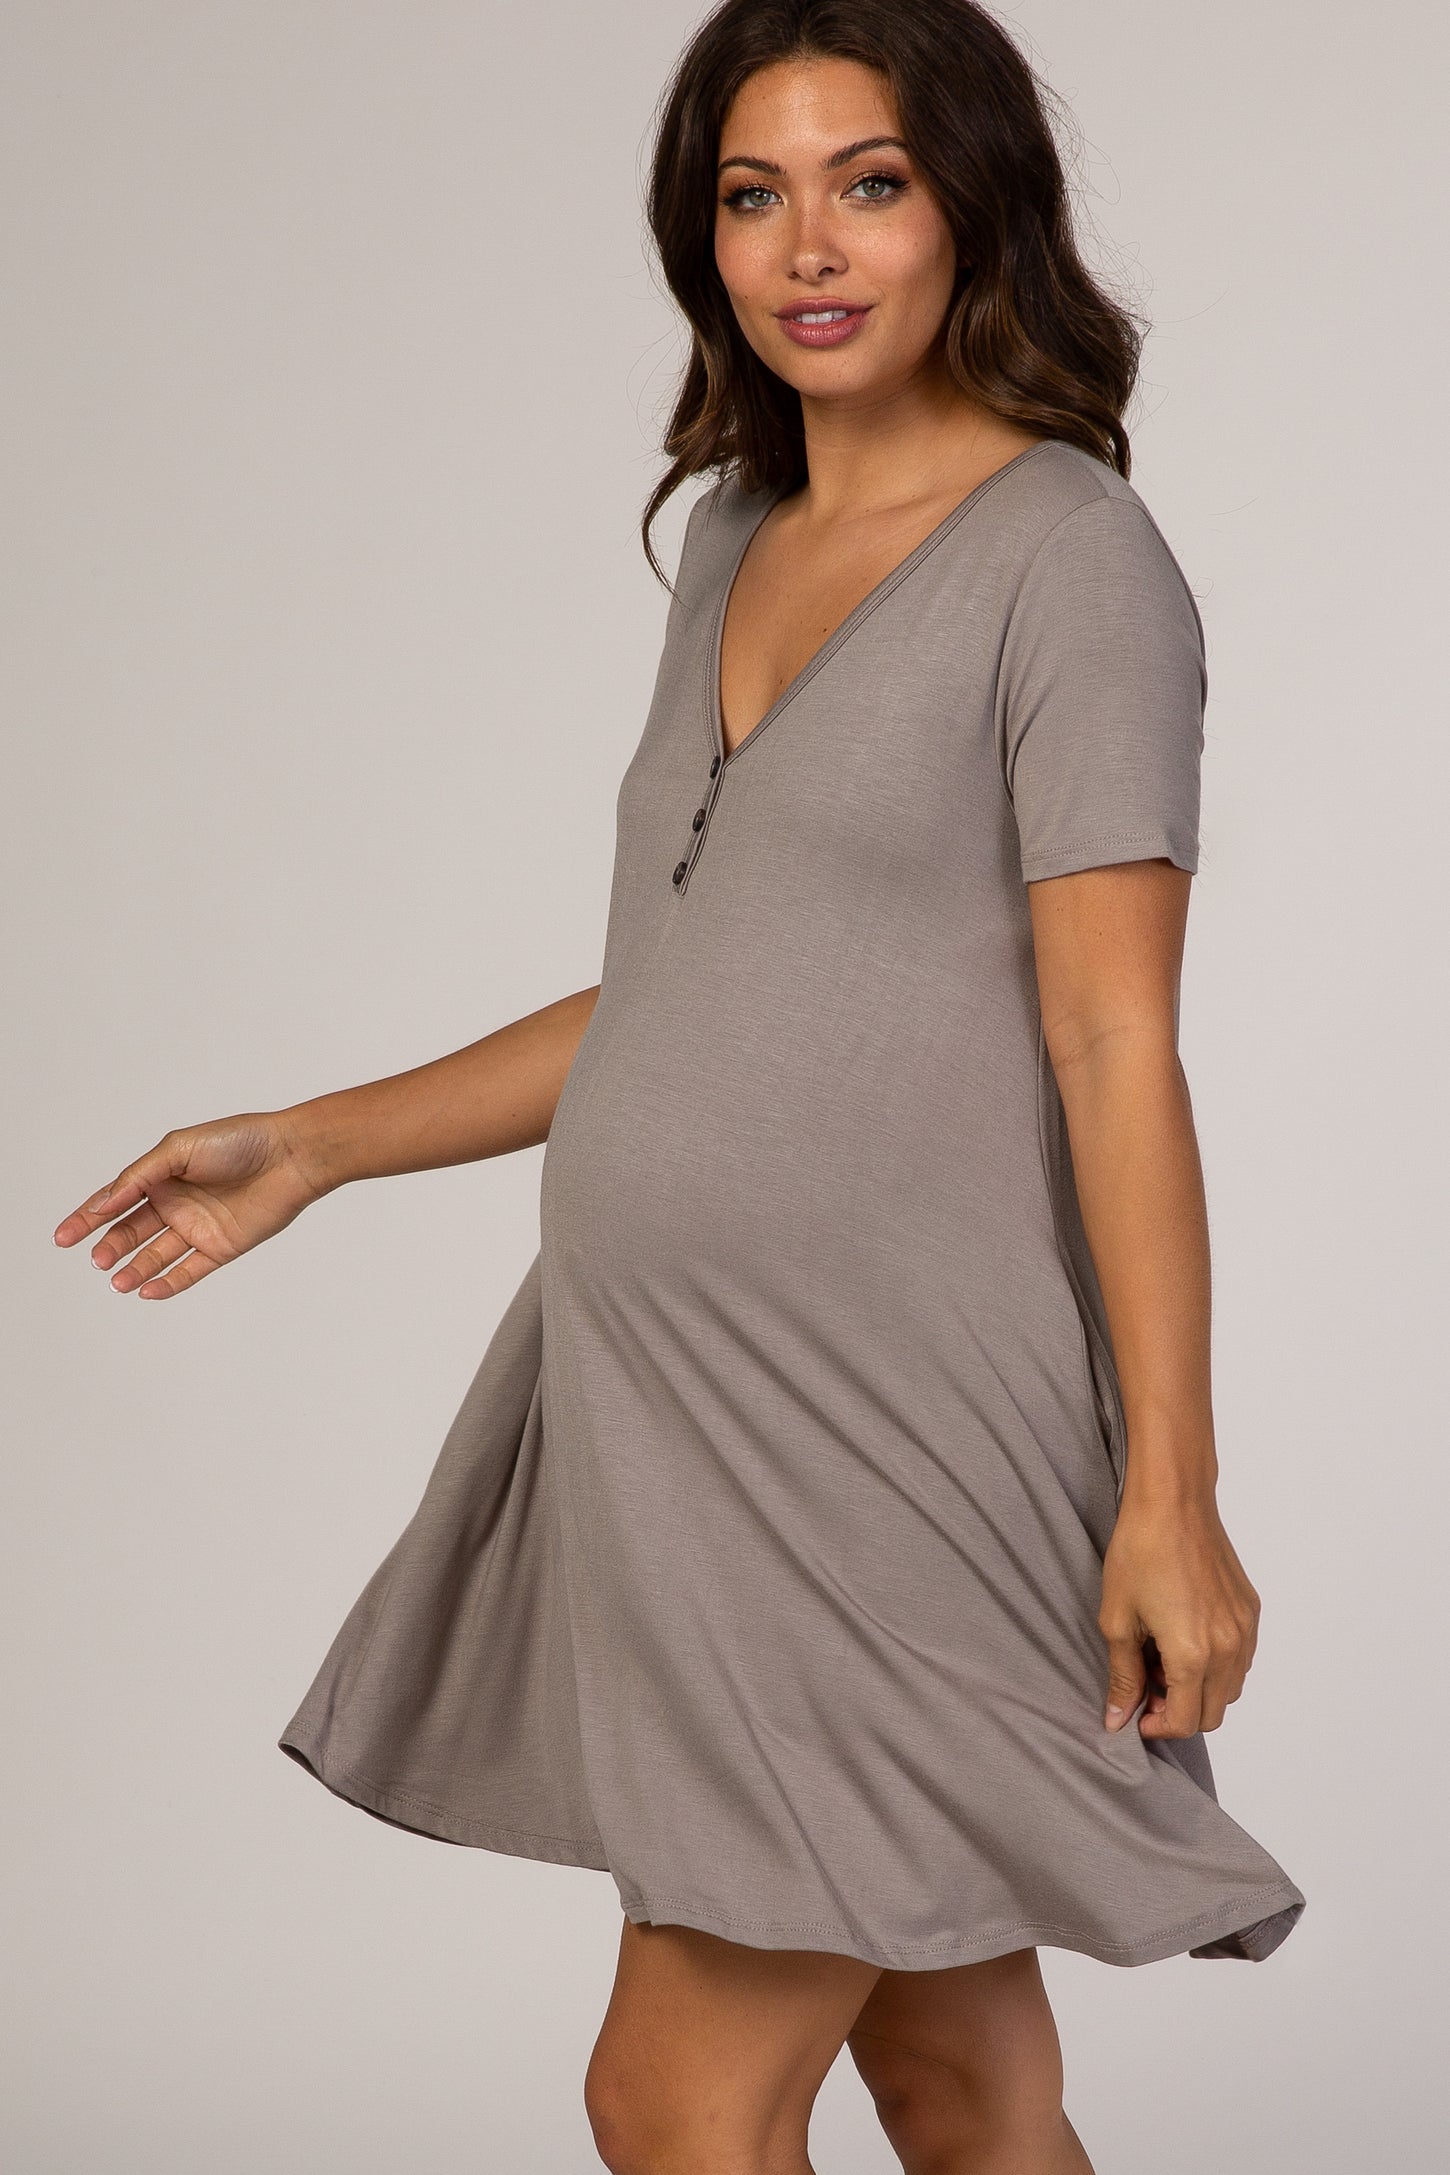 Taupe Short Sleeve Button Detail Maternity Swing Dress